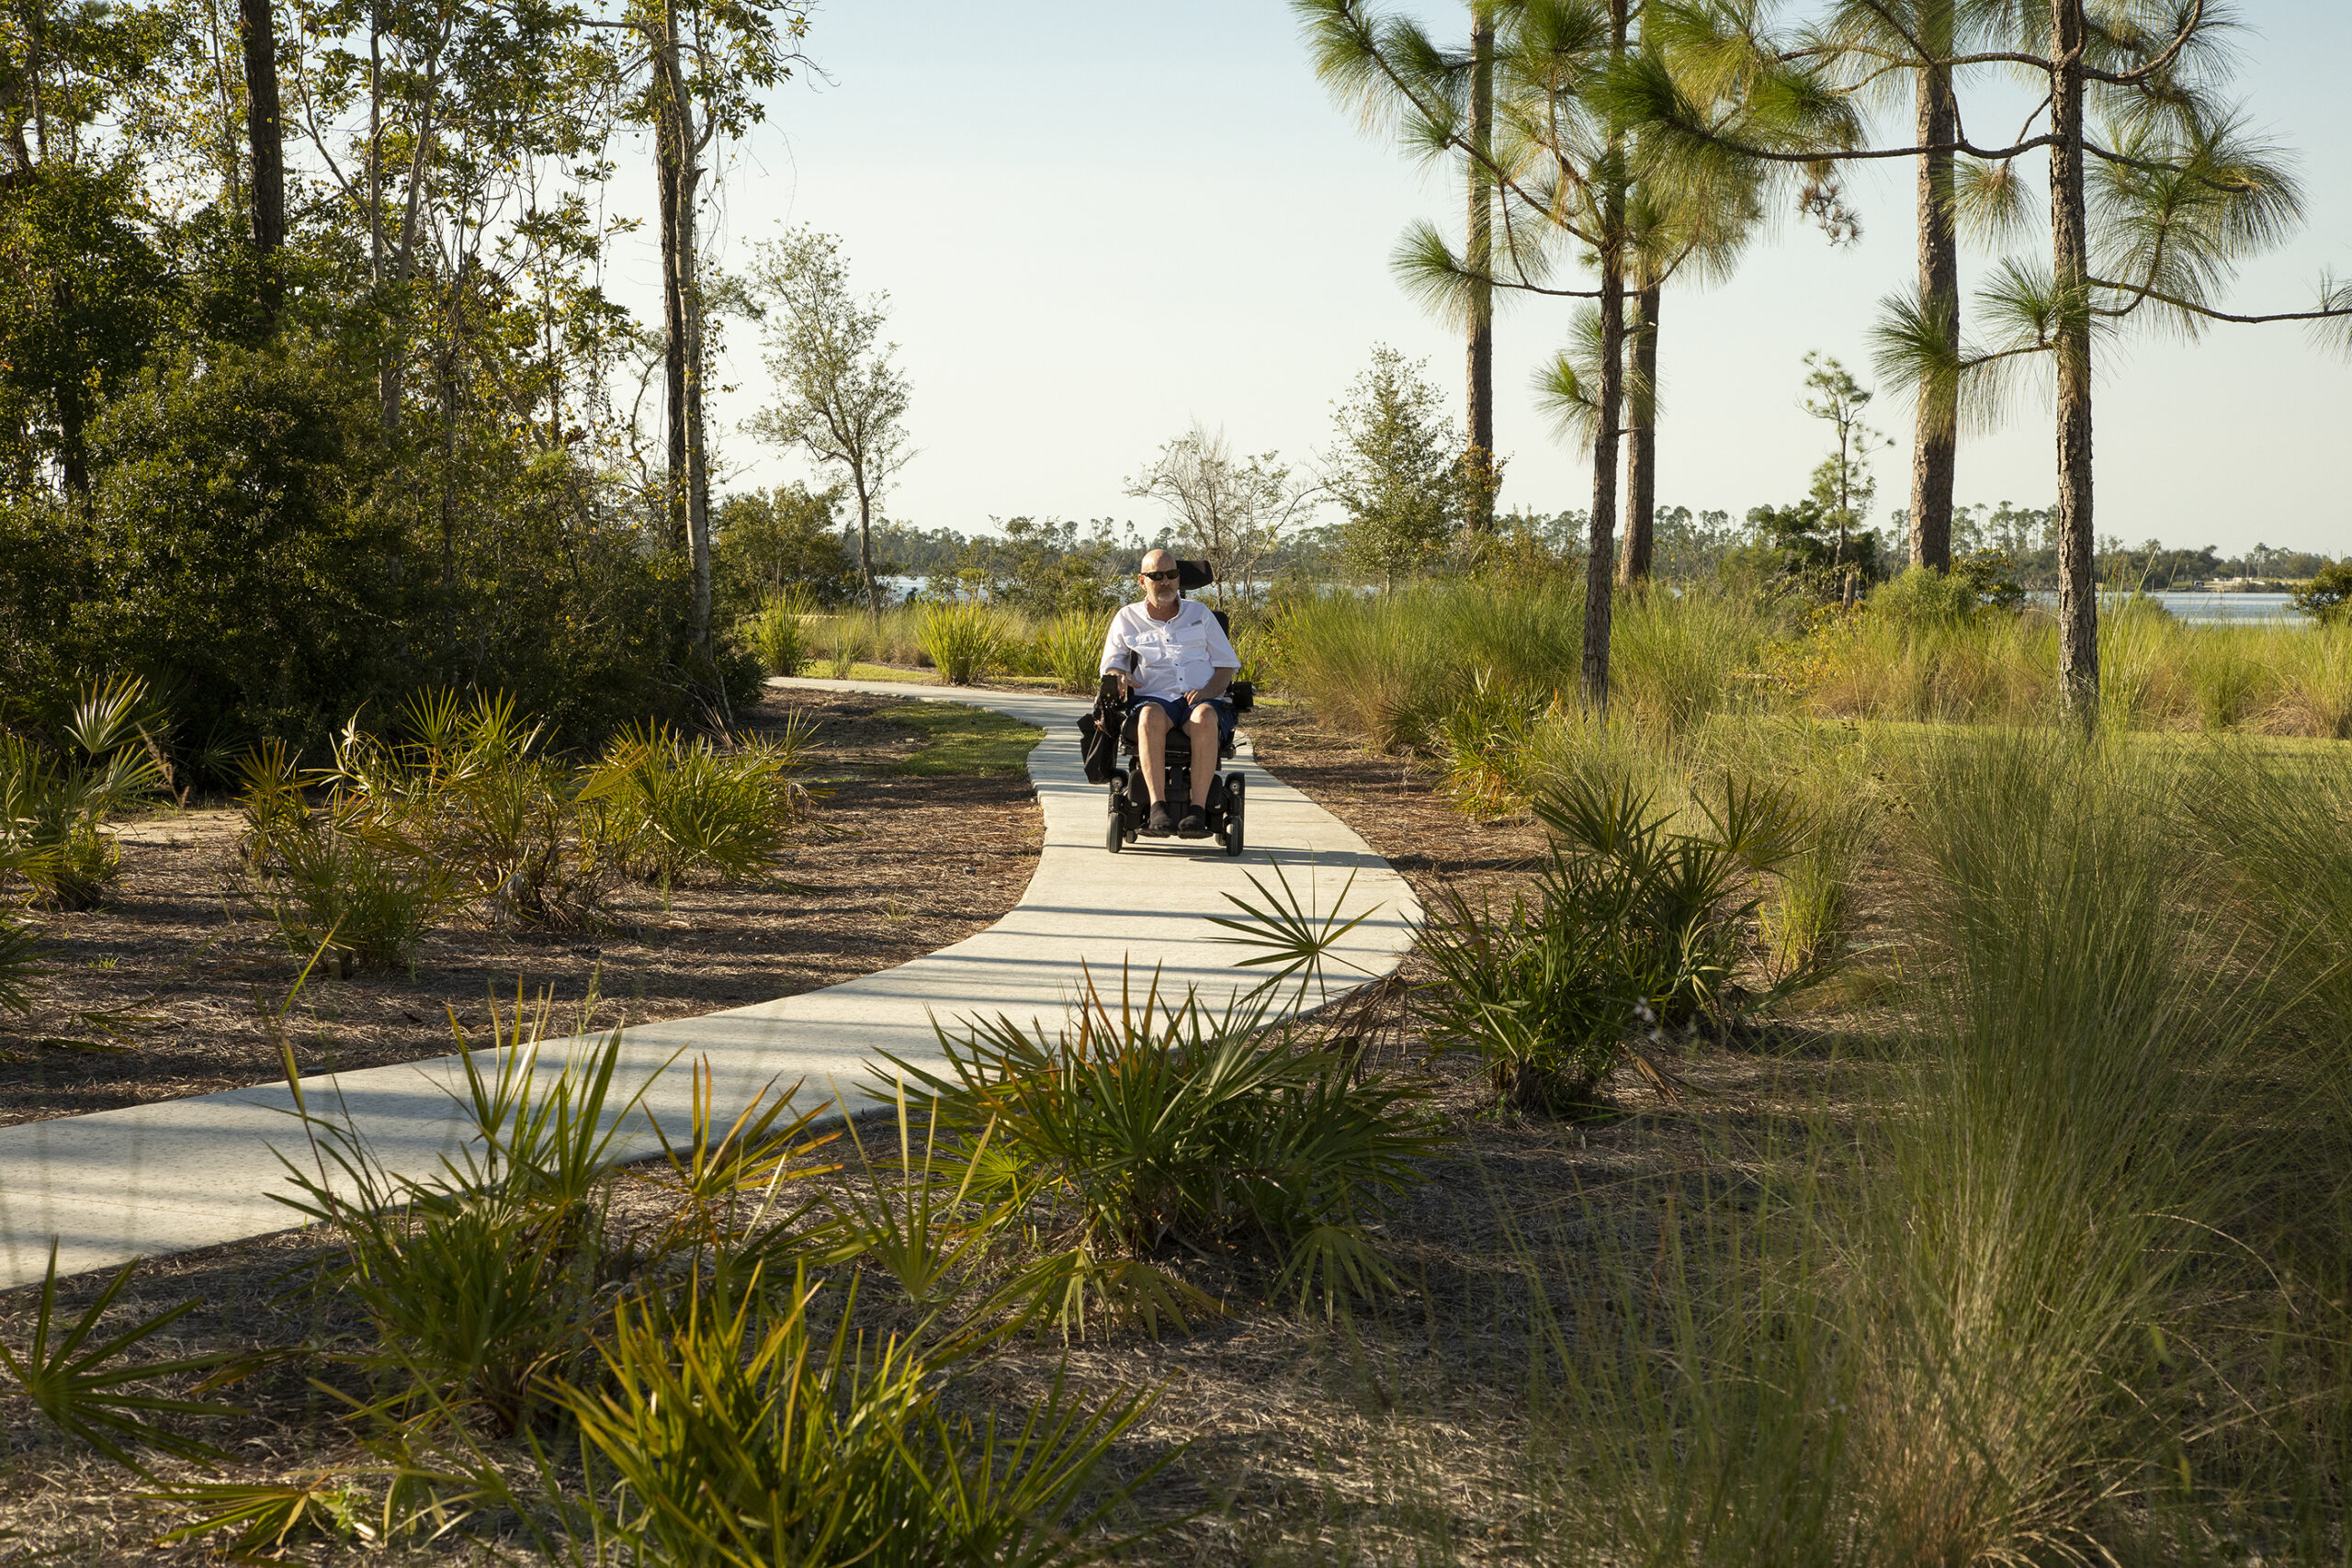 A man using a motorized wheelchair enjoys exploring Lynn Haven Park via the paved, accessible path.